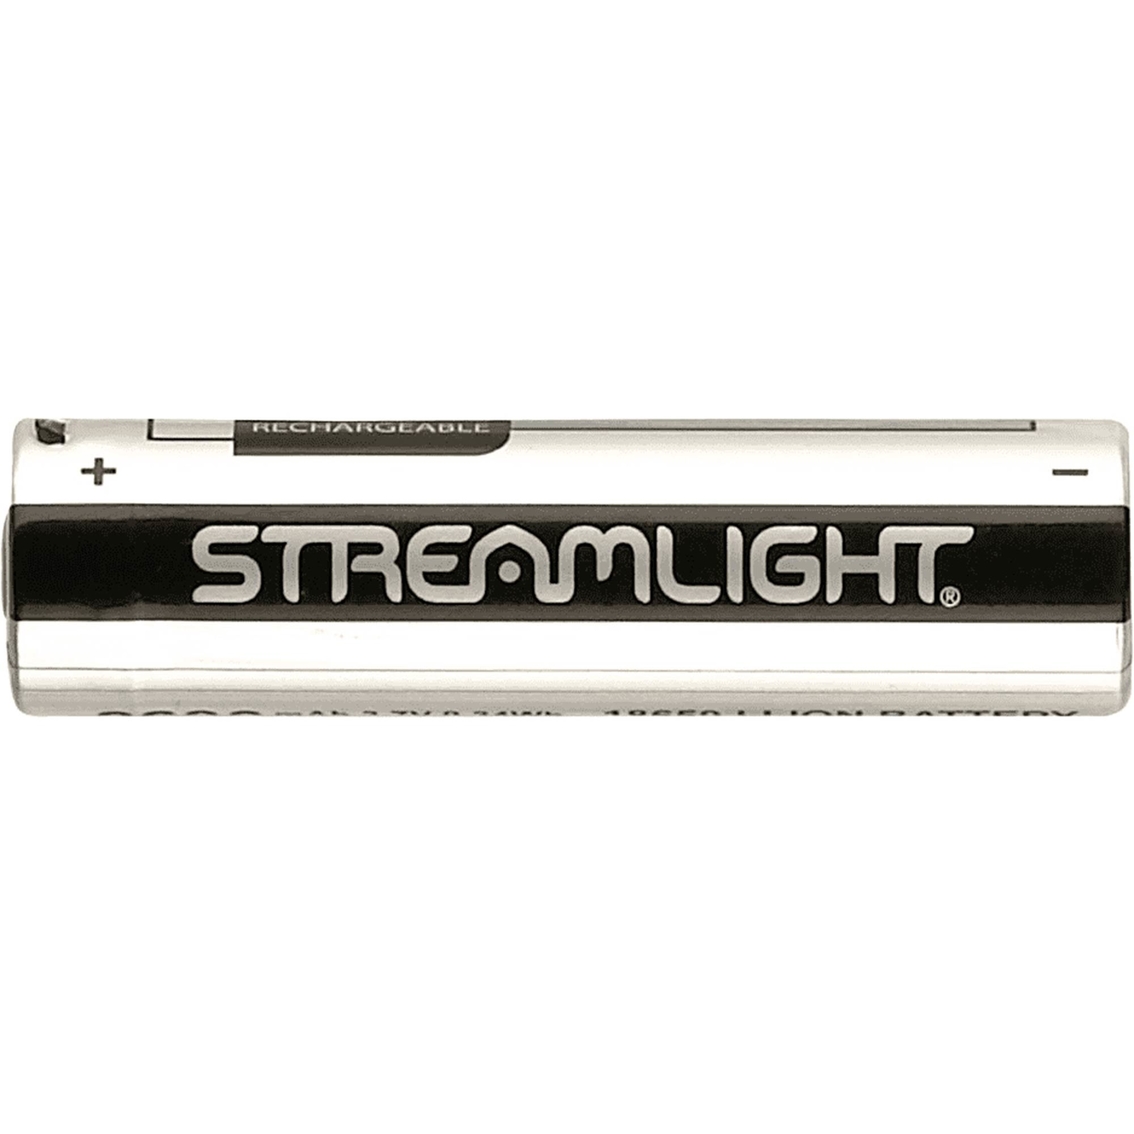 Streamlight 18650 Lithium Ion USB Rechargeable Battery Two Pack - Image 3 of 4